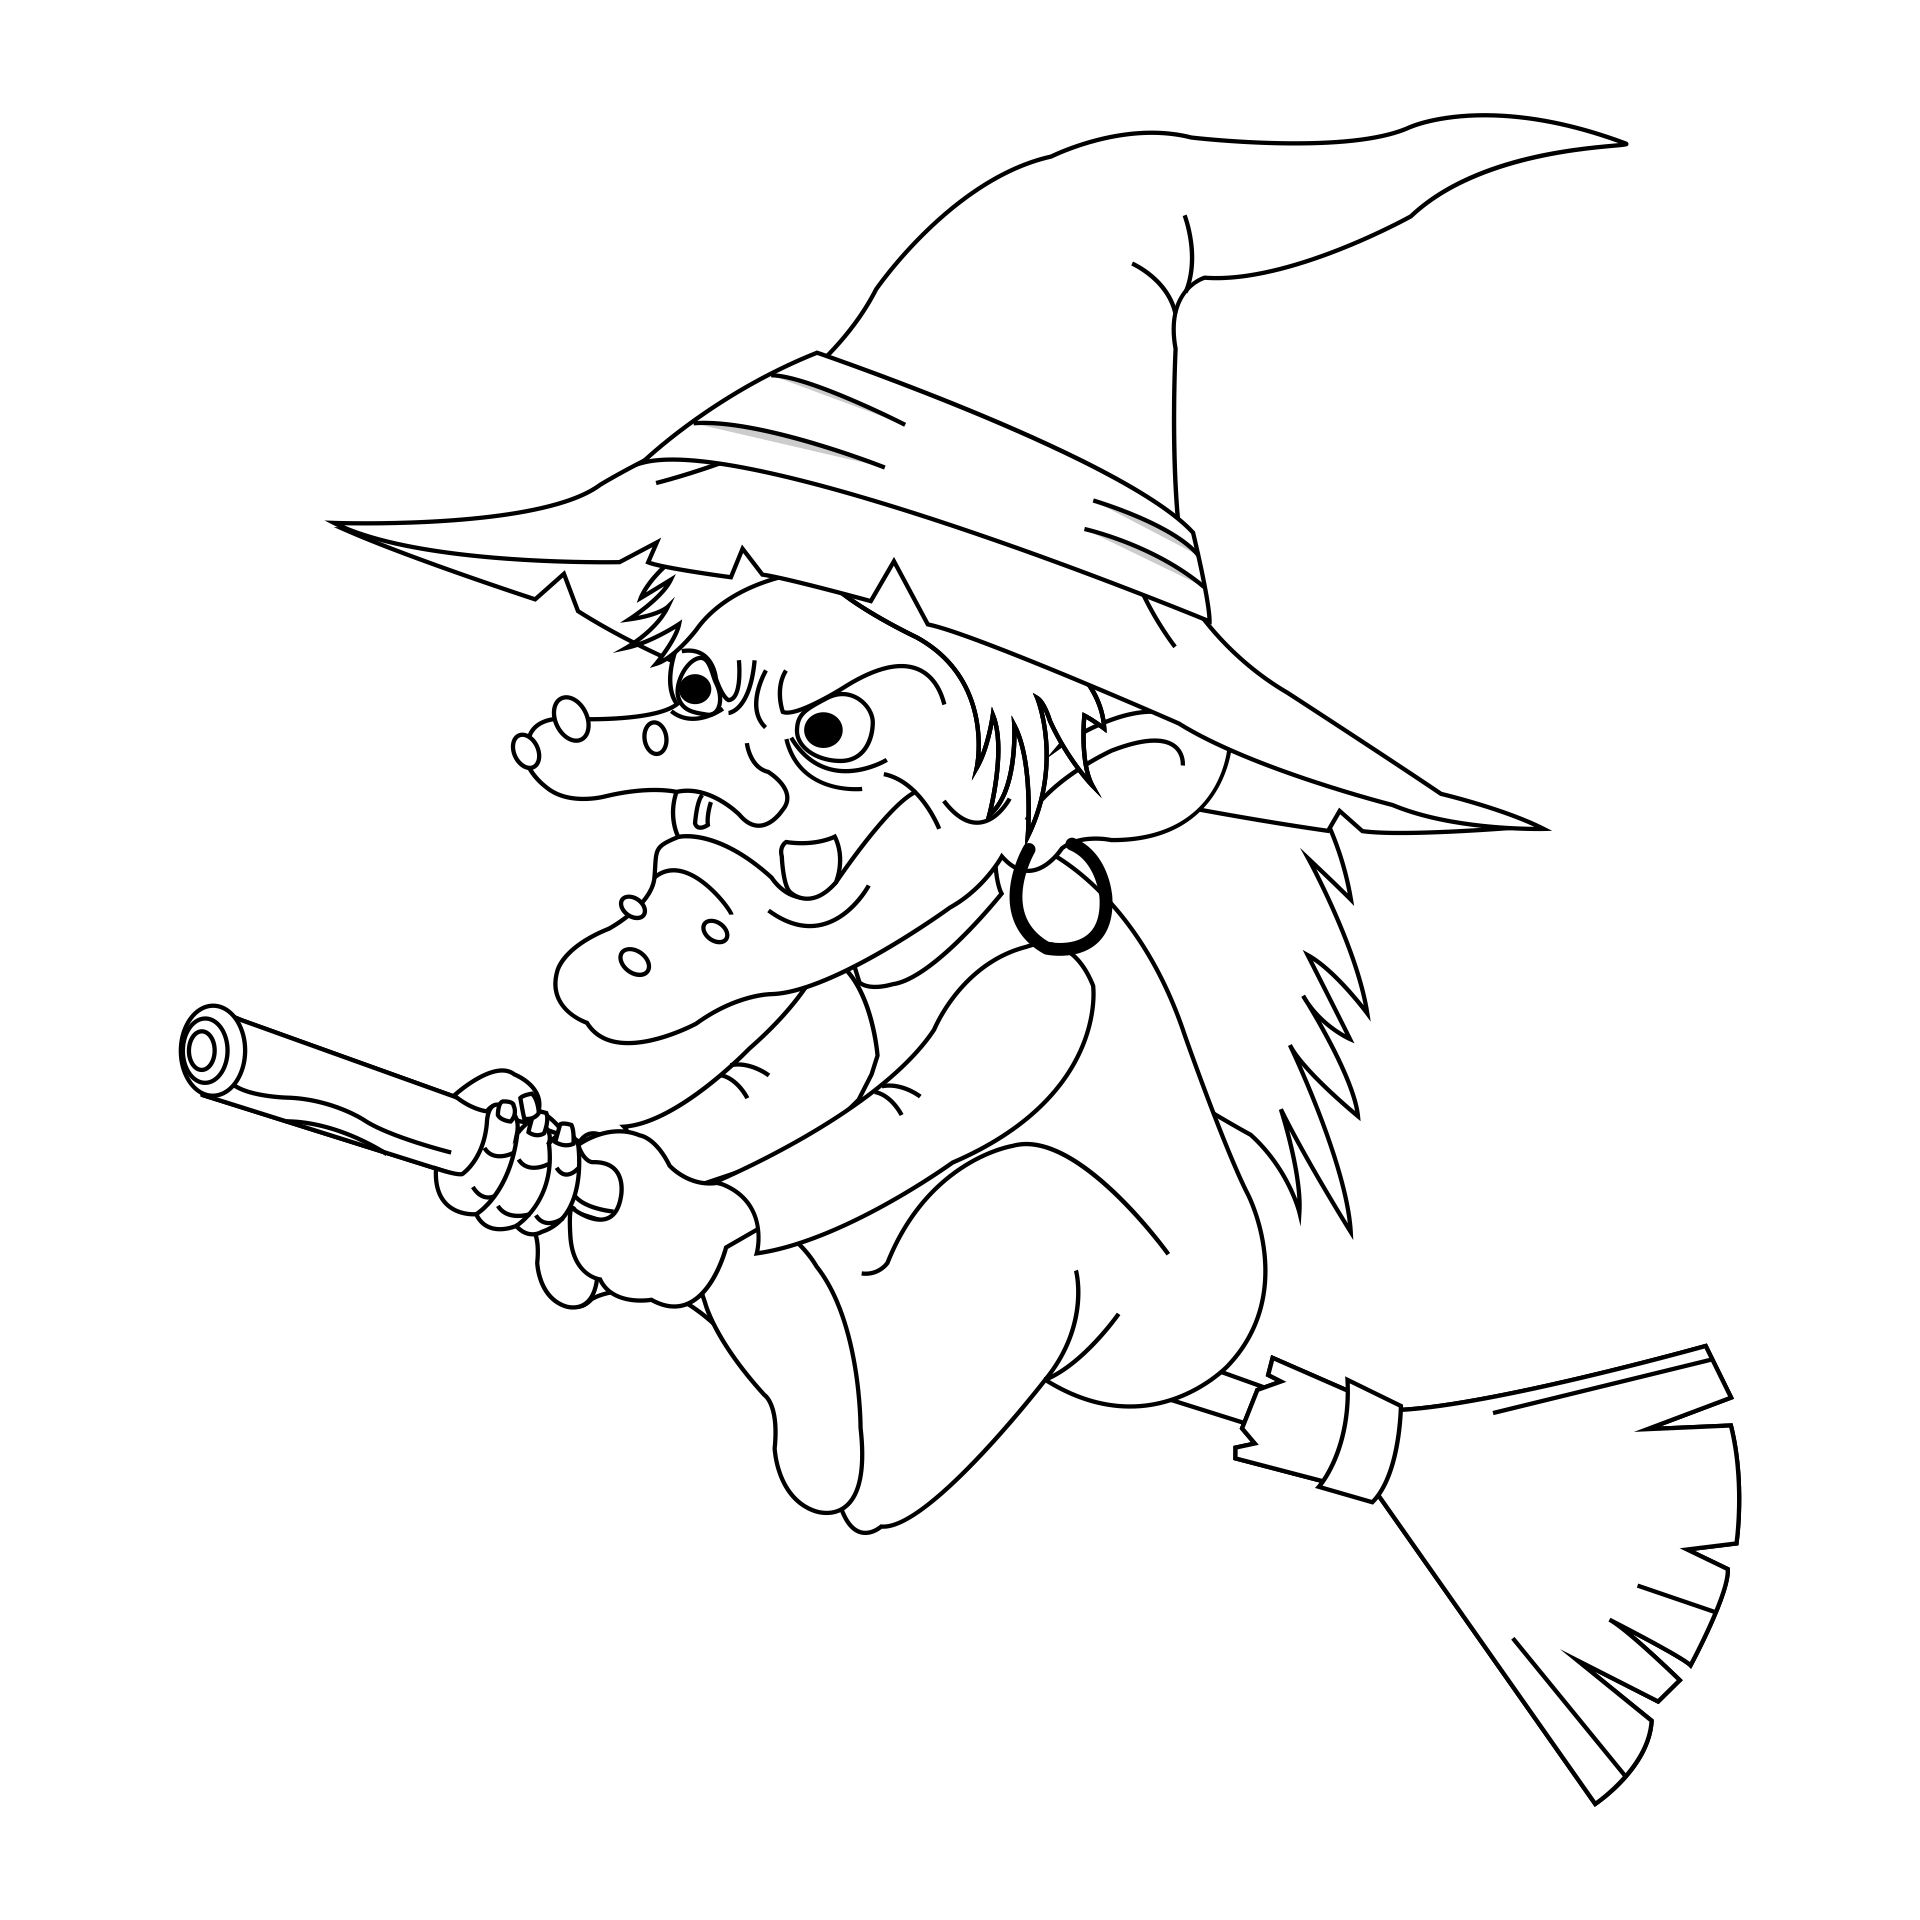 Witch Halloween Coloring Worksheet Printable